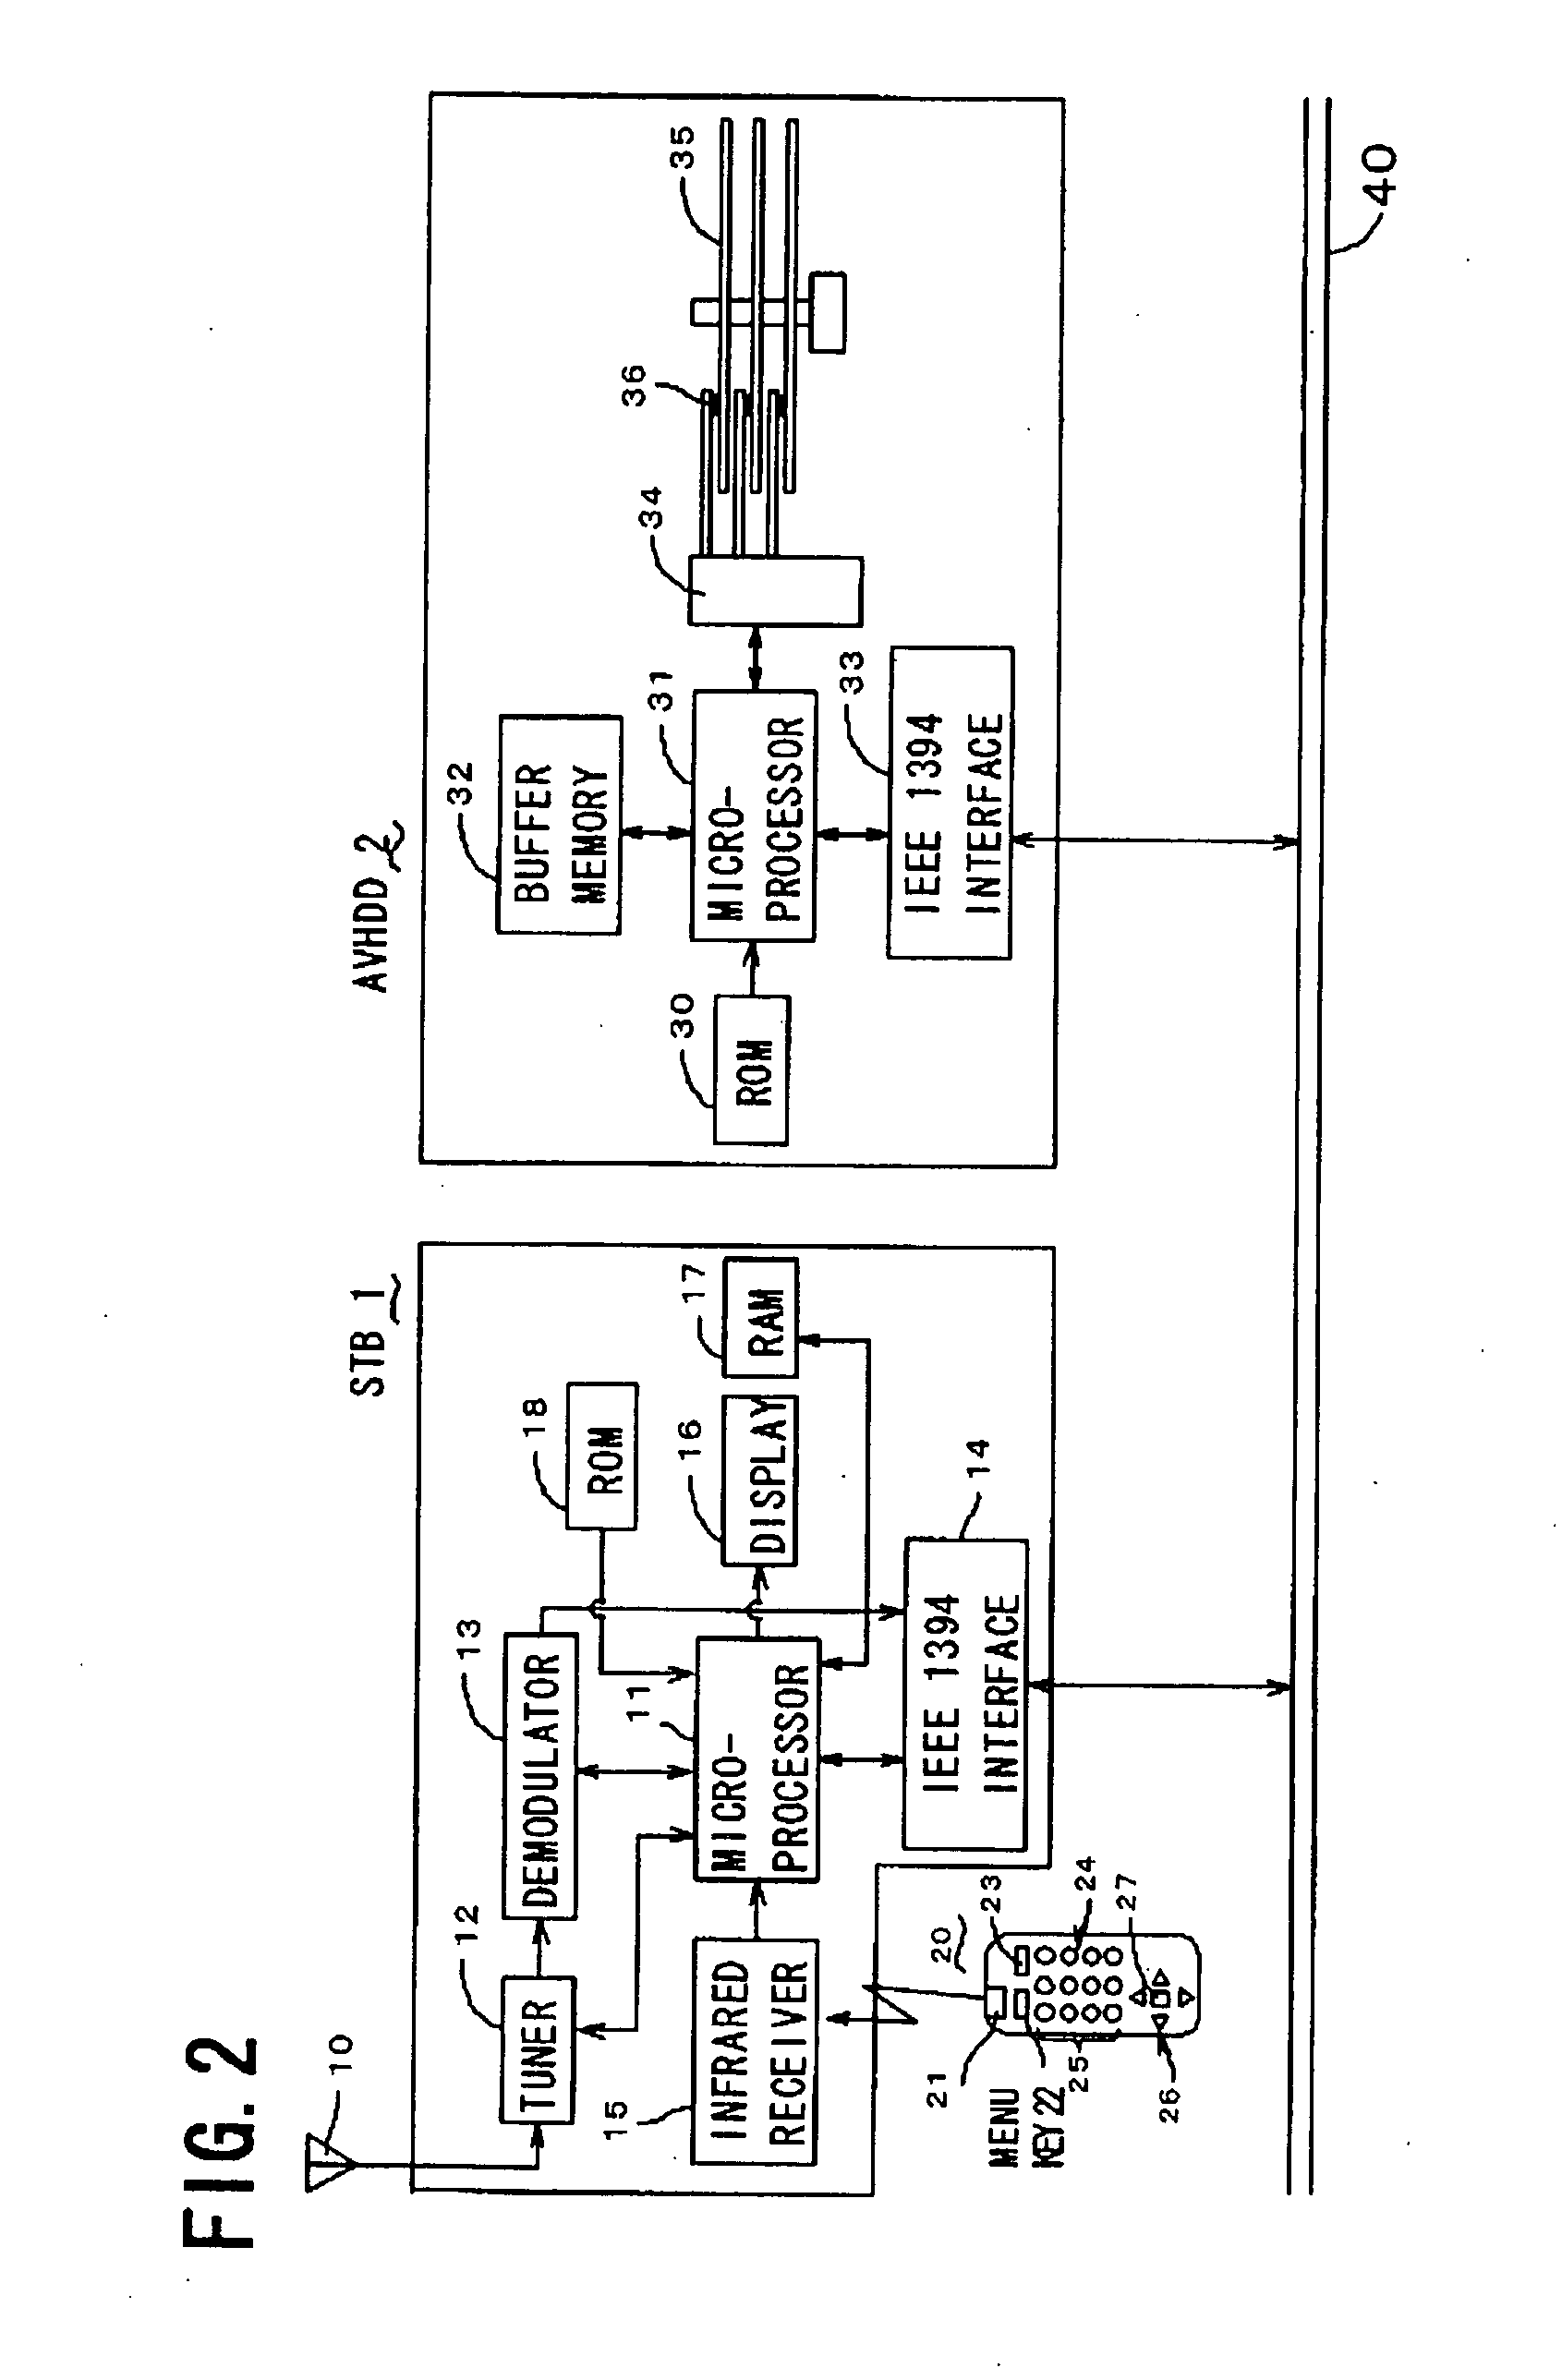 Controller to be connected to IEEE 1394 serial bus